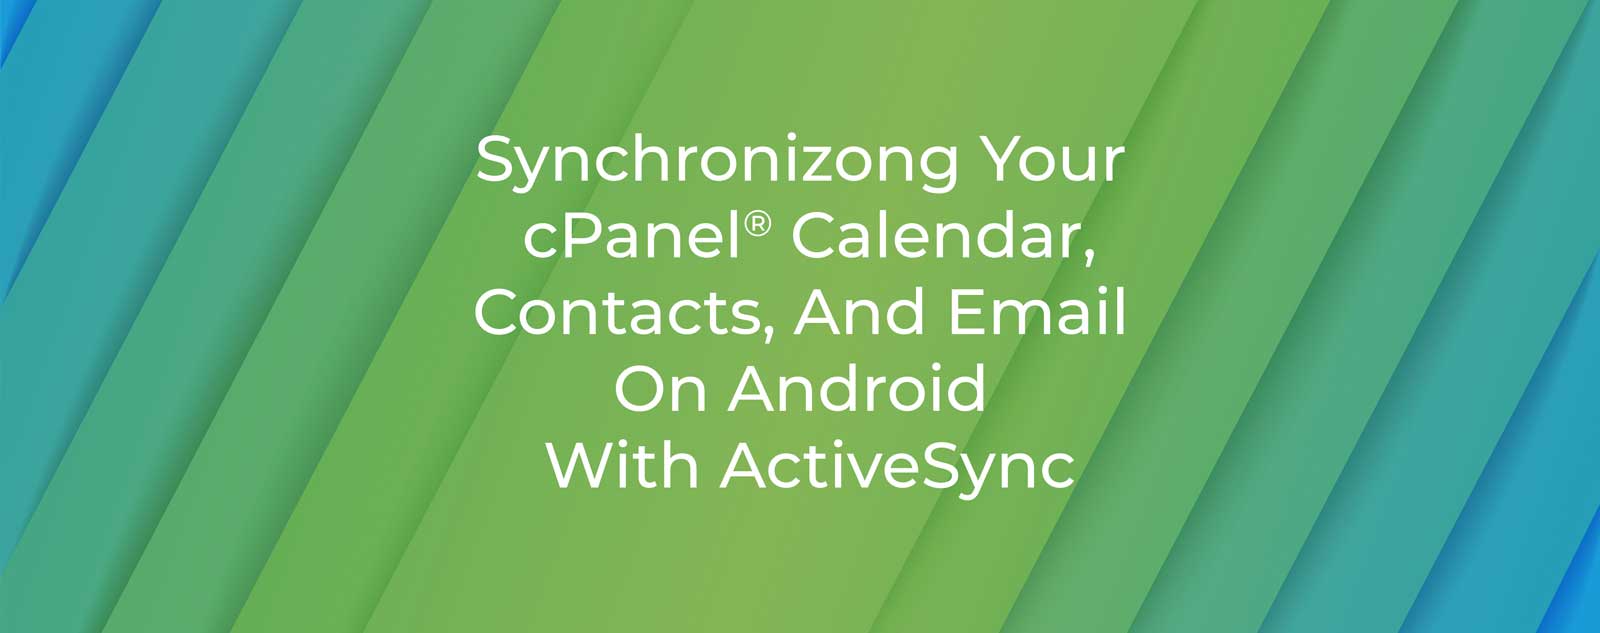 synchronizing-your-cpanel-calendar-contacts-and-email-on-android-with-activesync